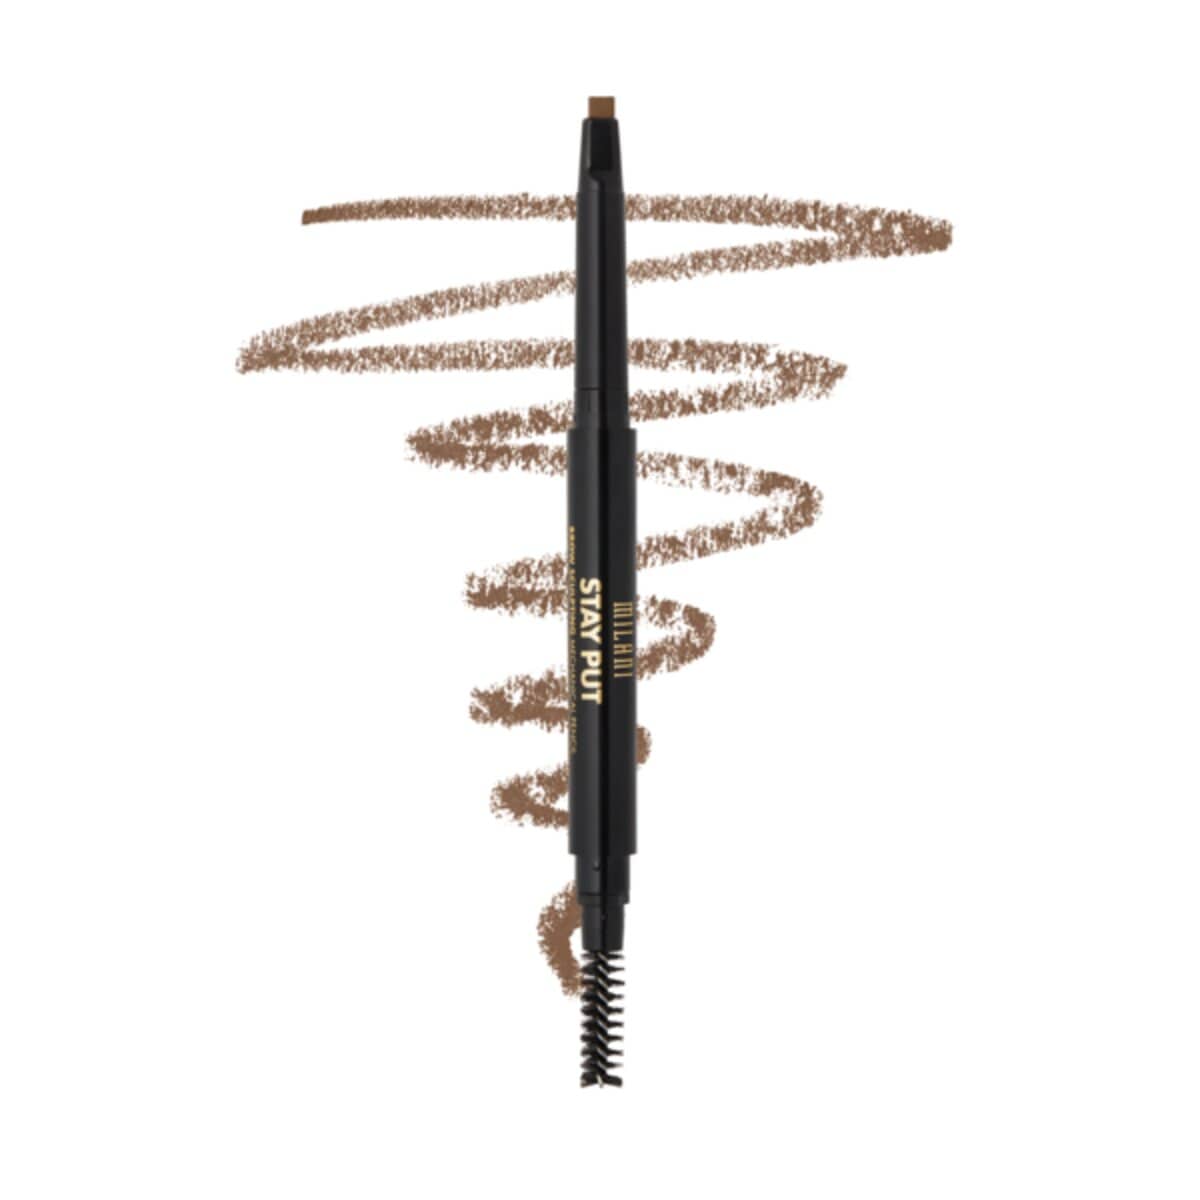 STAY PUT BROW SCULPTING MECHANICAL PENCIL SOFT BROWN - MILANI